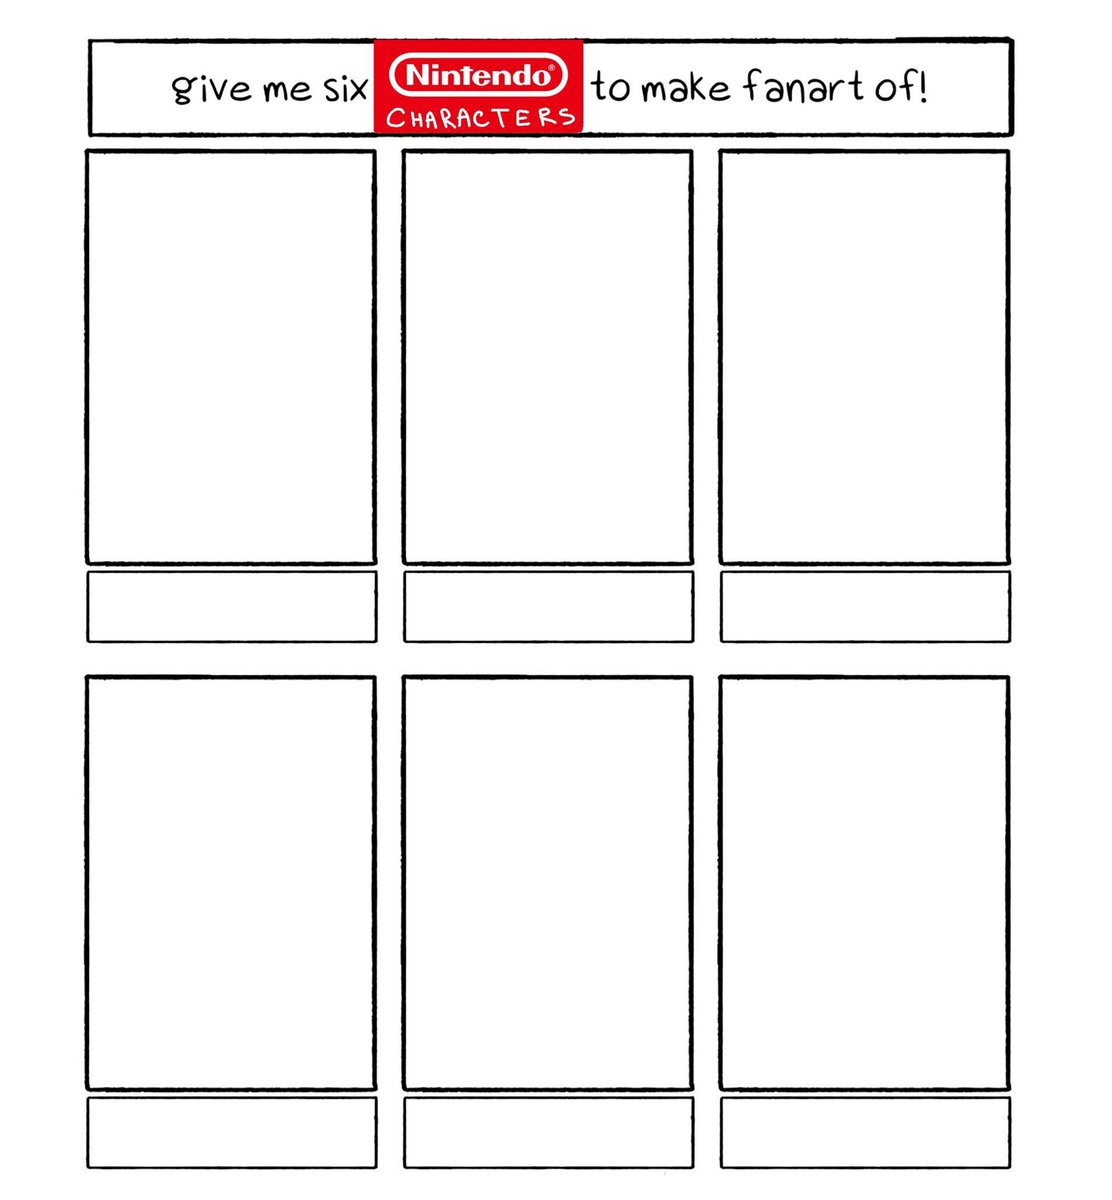 No promises but gimme Nintendo characters 